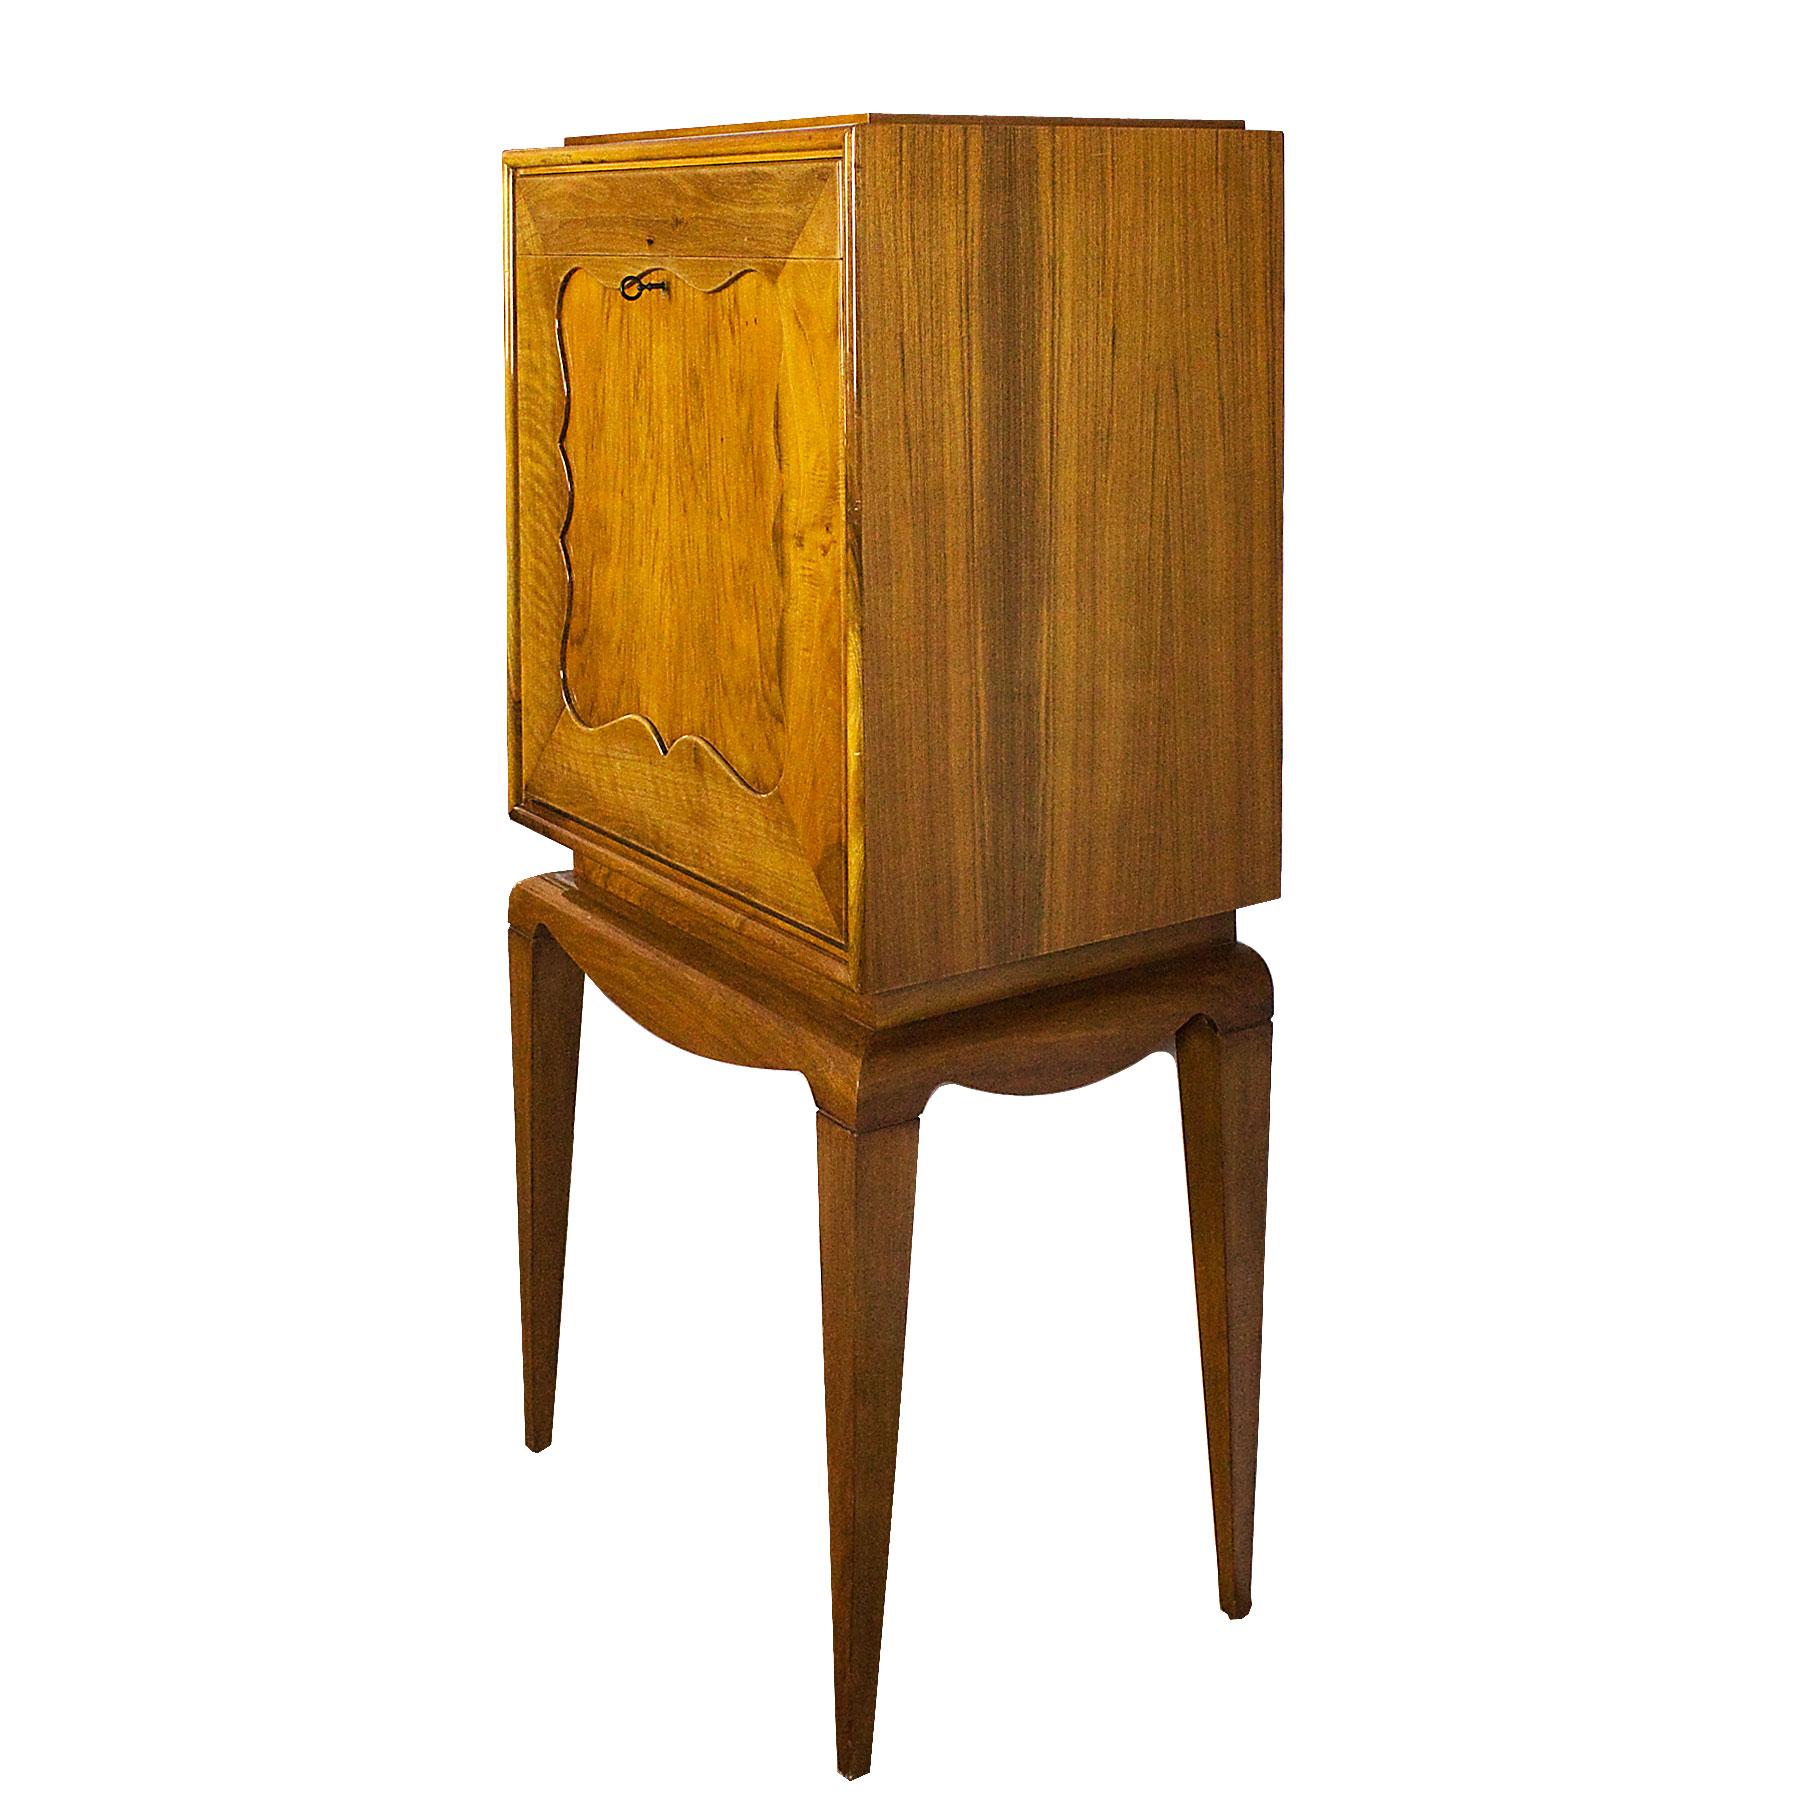 Walnut secretaire cabinet with a flap door and a secret drawer, French polish.

France, circa 1940.